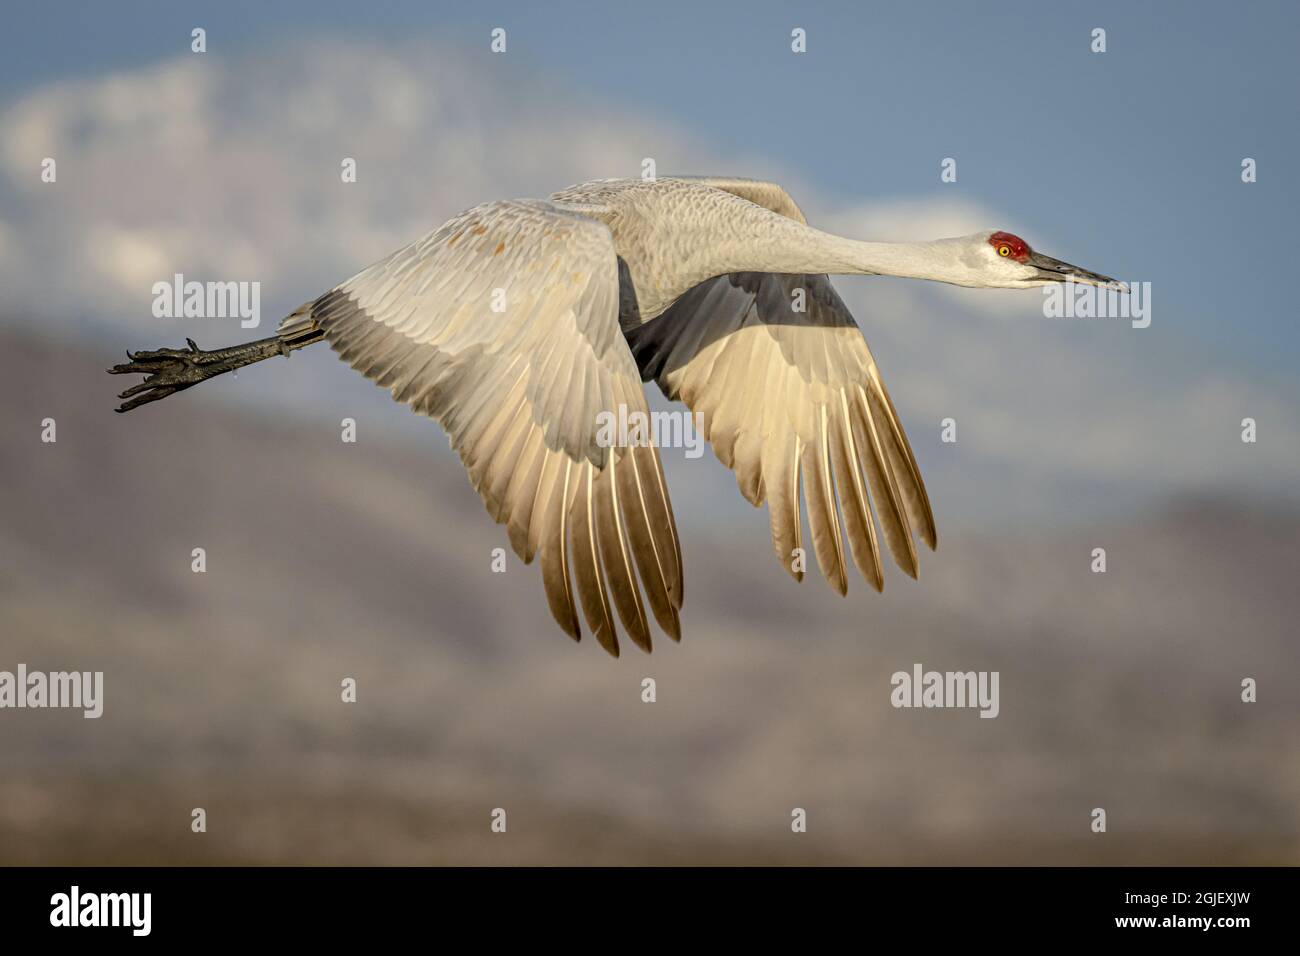 USA, New Mexico, Bosque del Apache National Wildlife Reserve. Sandhill crane flying. Credit as Fred Lord / Jaynes Gallery / DanitaDelimont.com Stock Photo